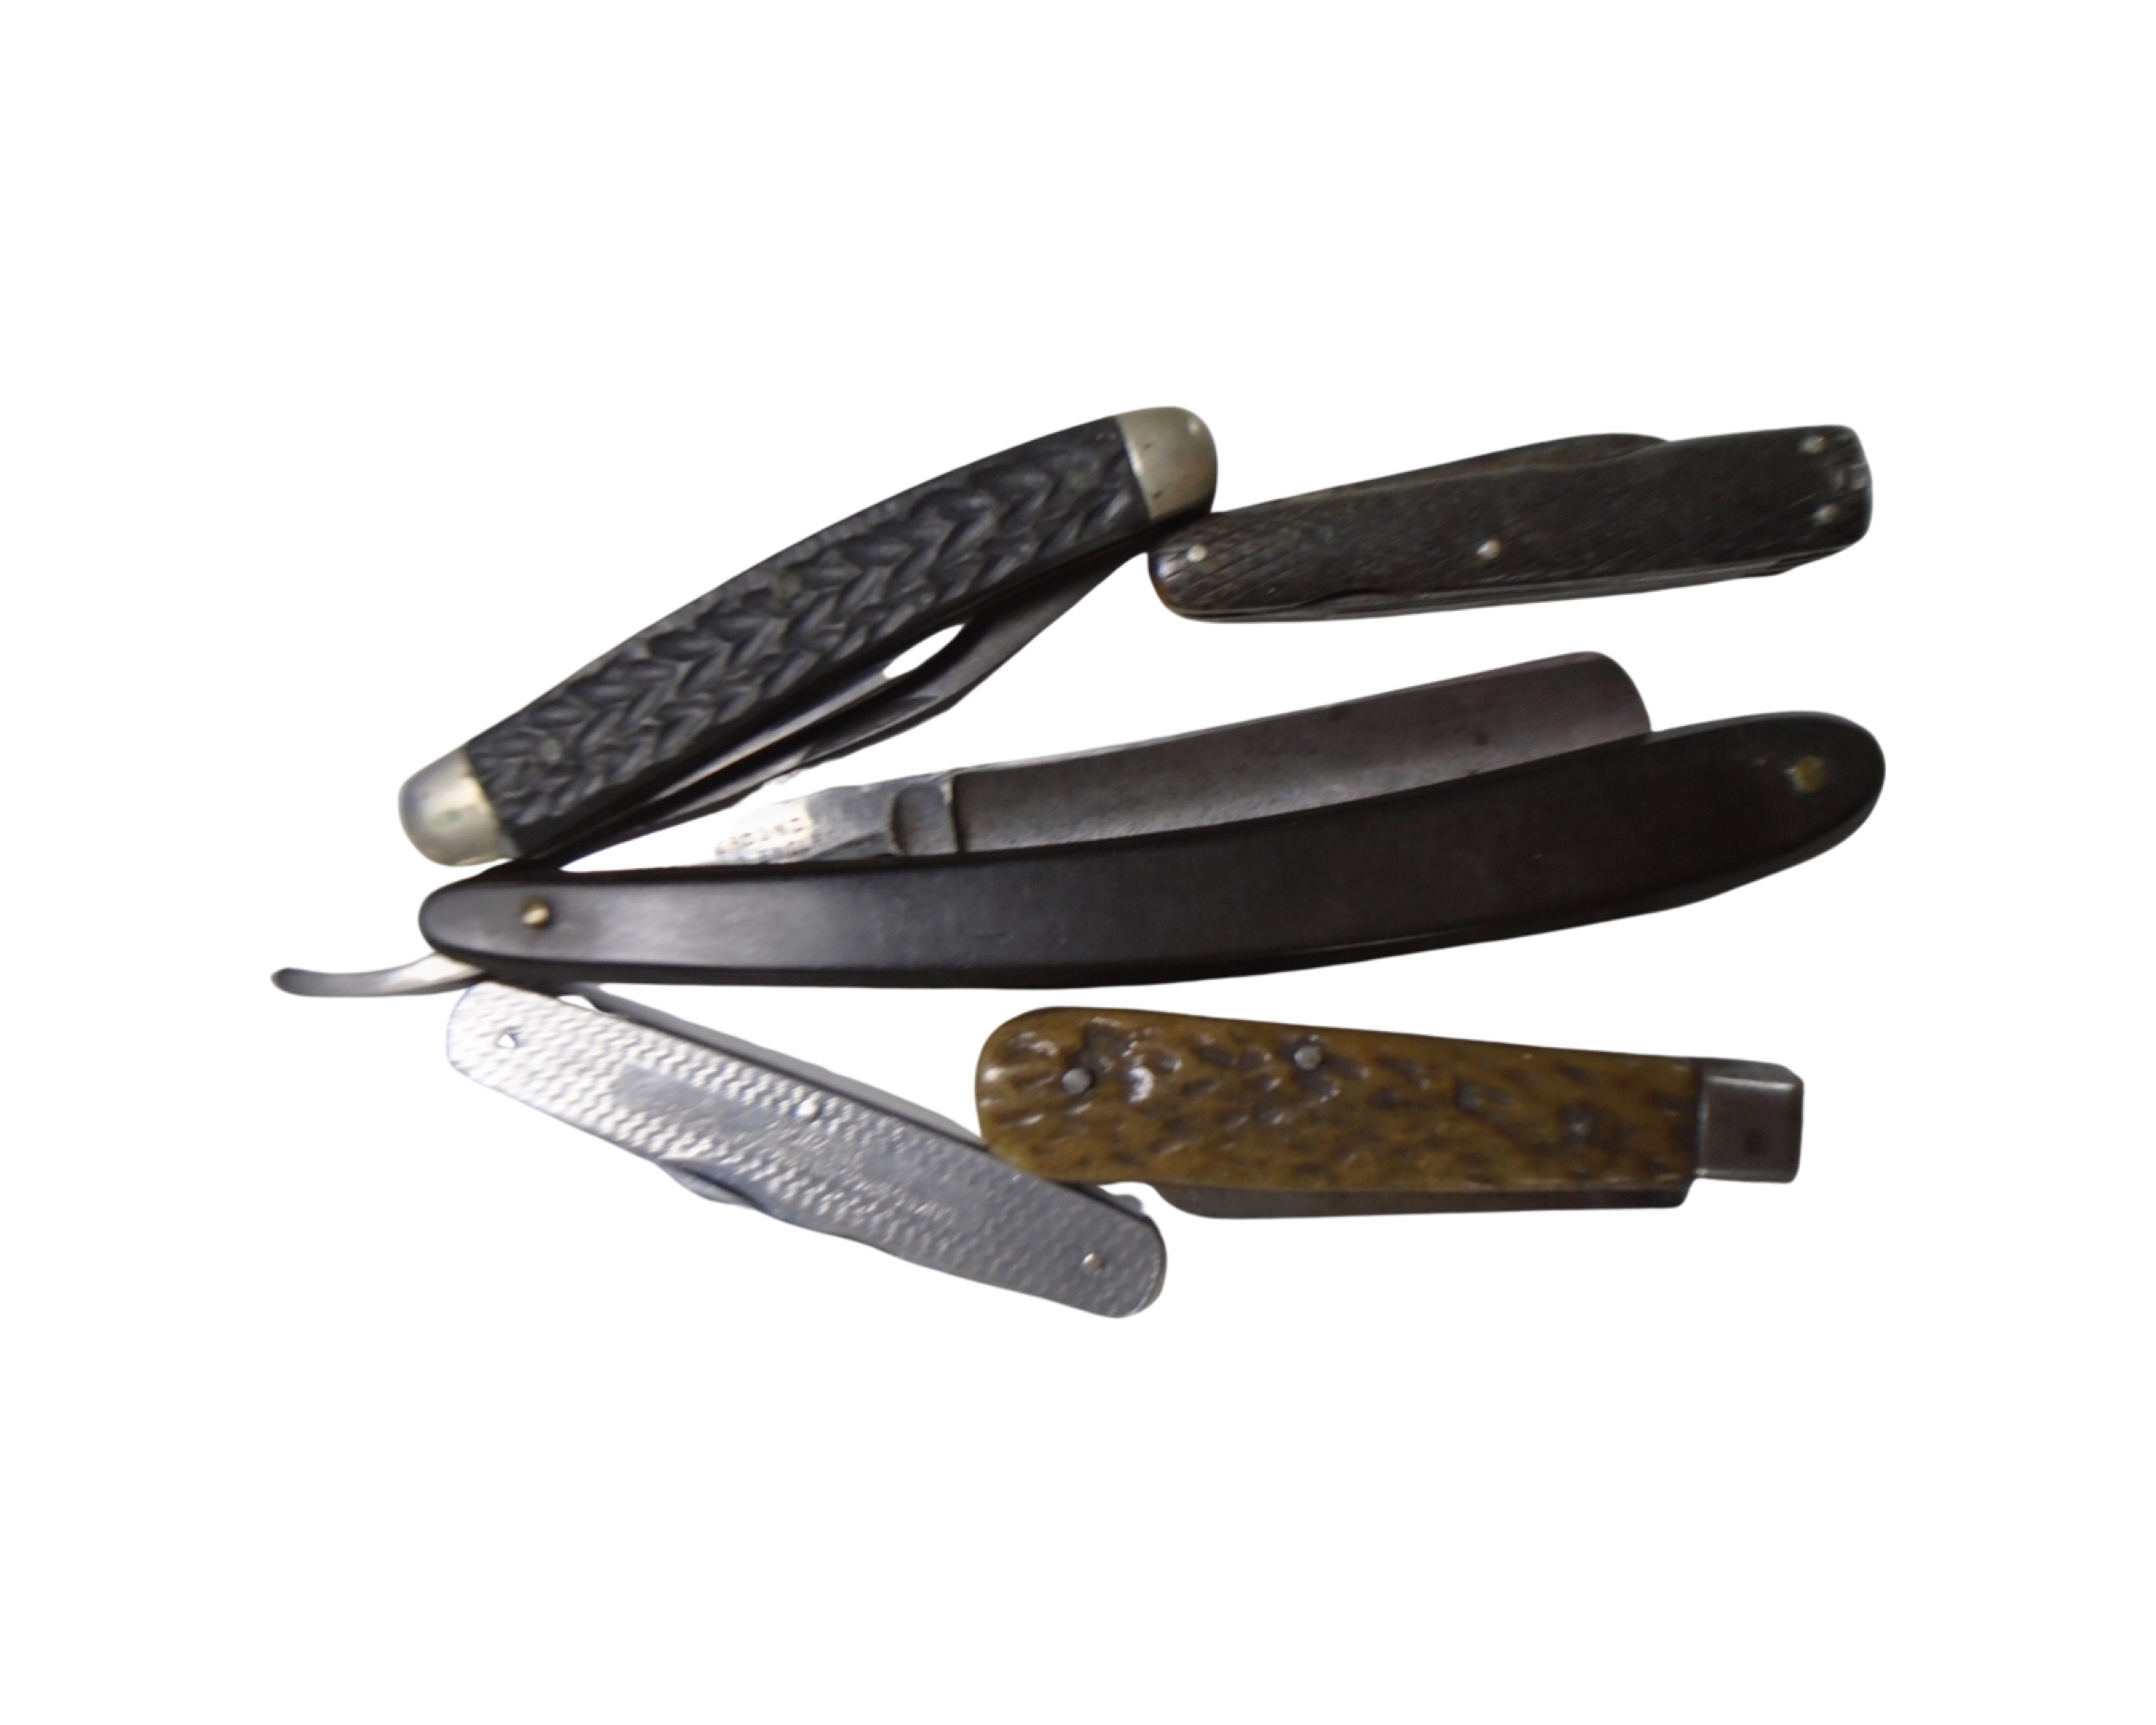 A vintage cut throat razor together with four pen knives.